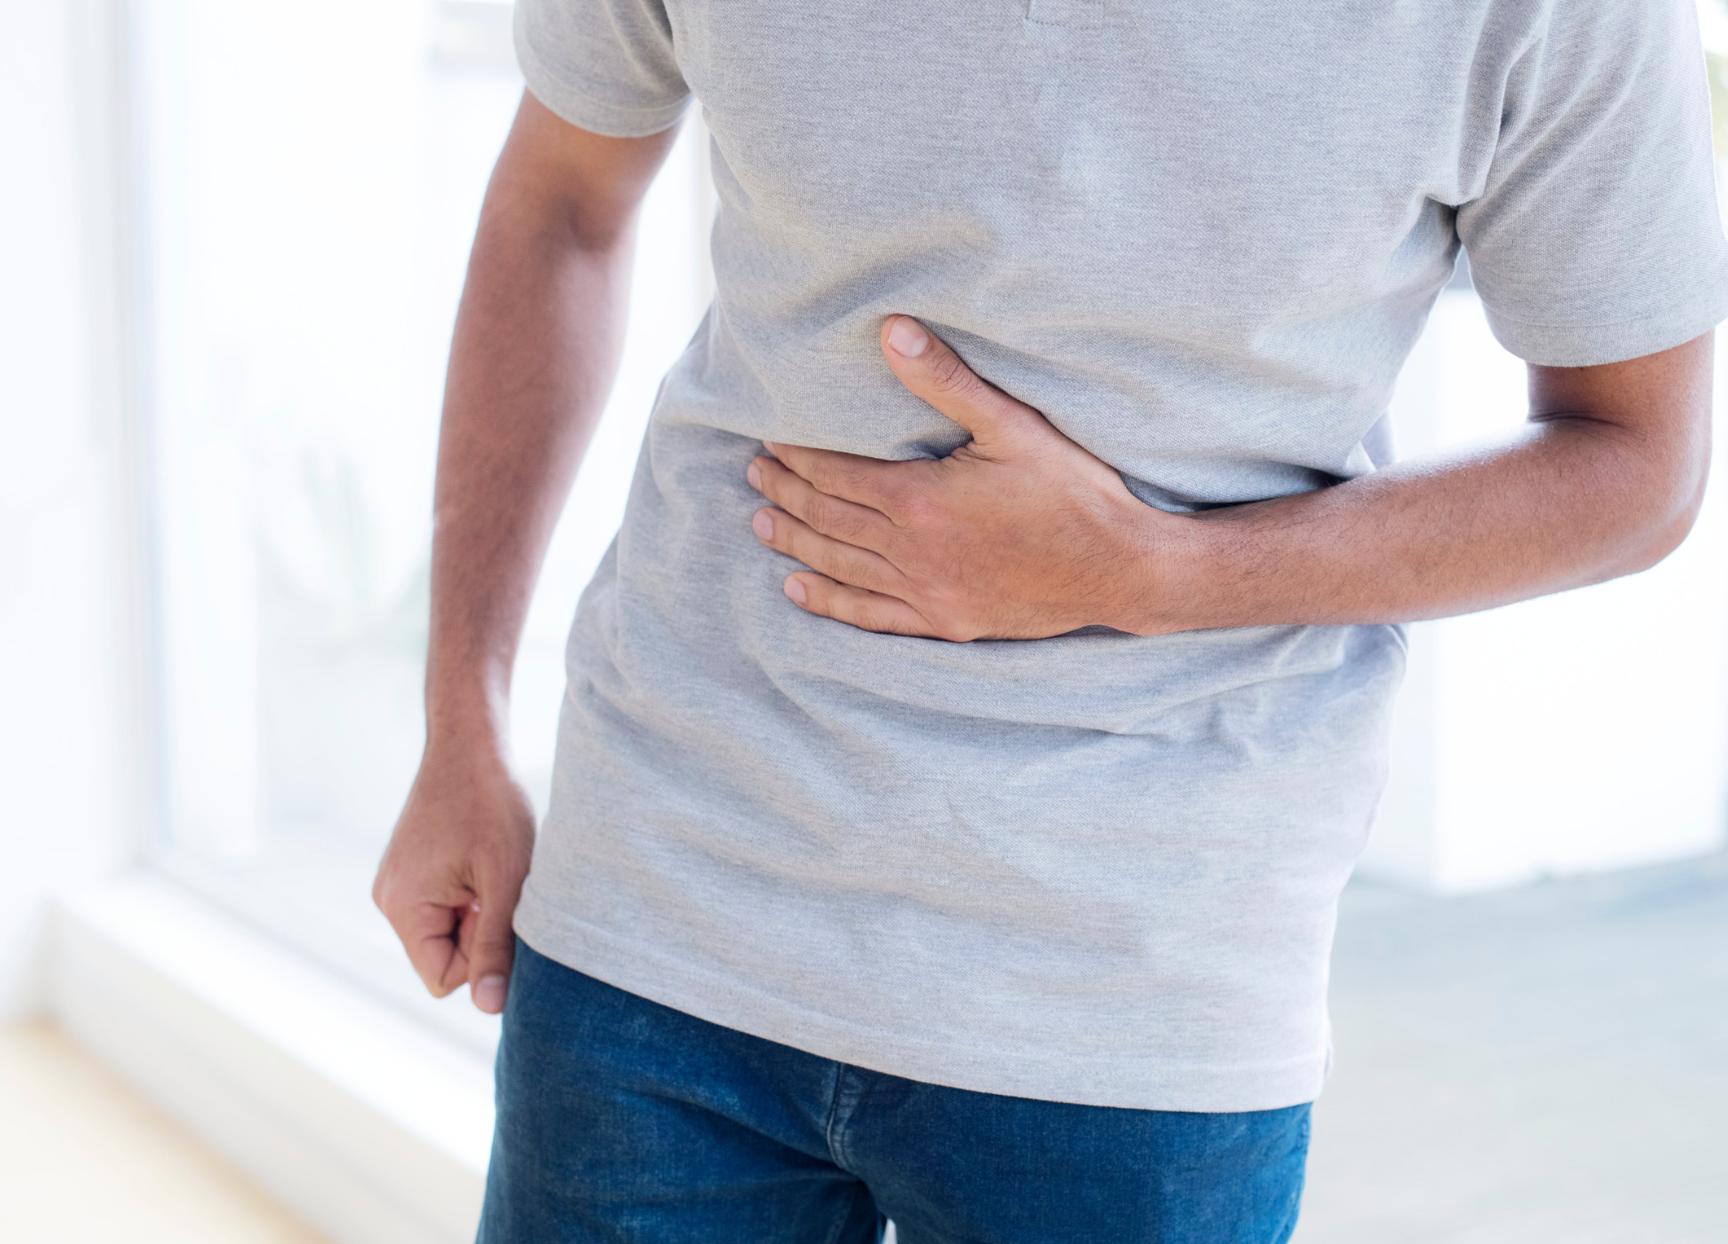 IBS vs. IBD: What Are The Main Differences Between The Two?